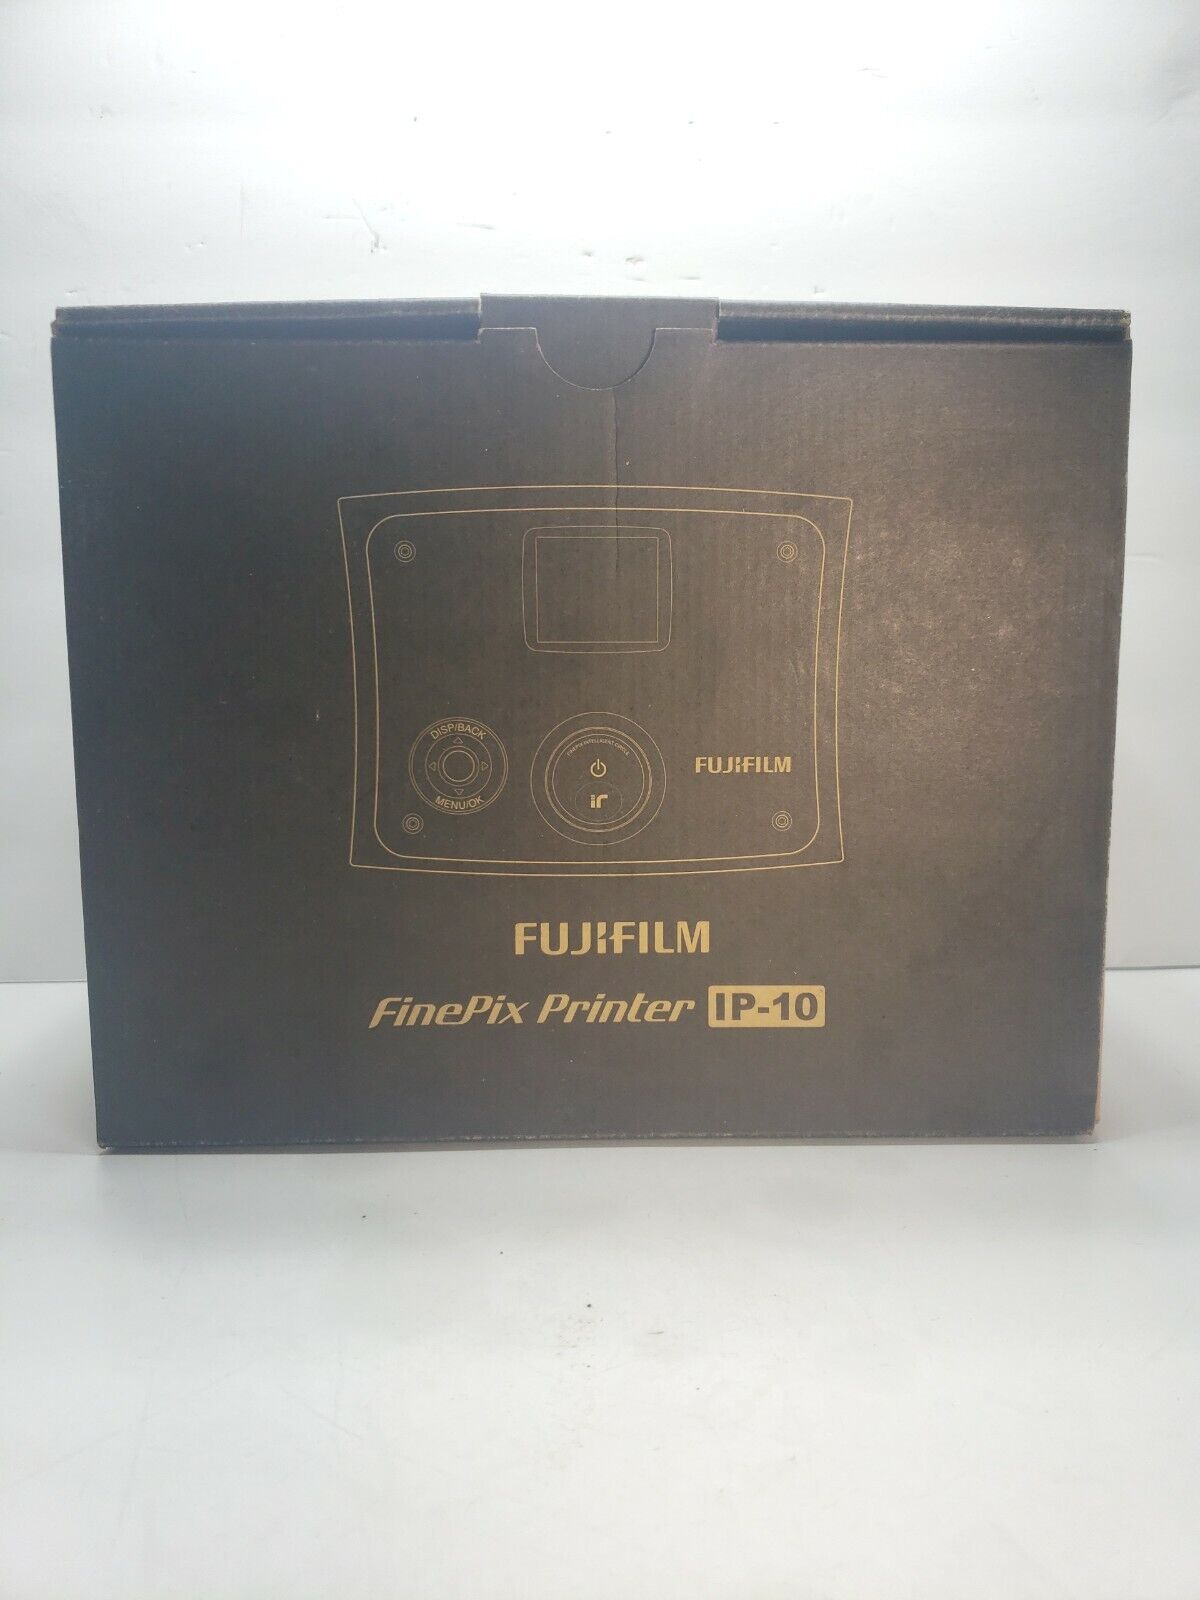 Fujifilm Finepix Printer IP-10 With Powercord And Manual New In Box